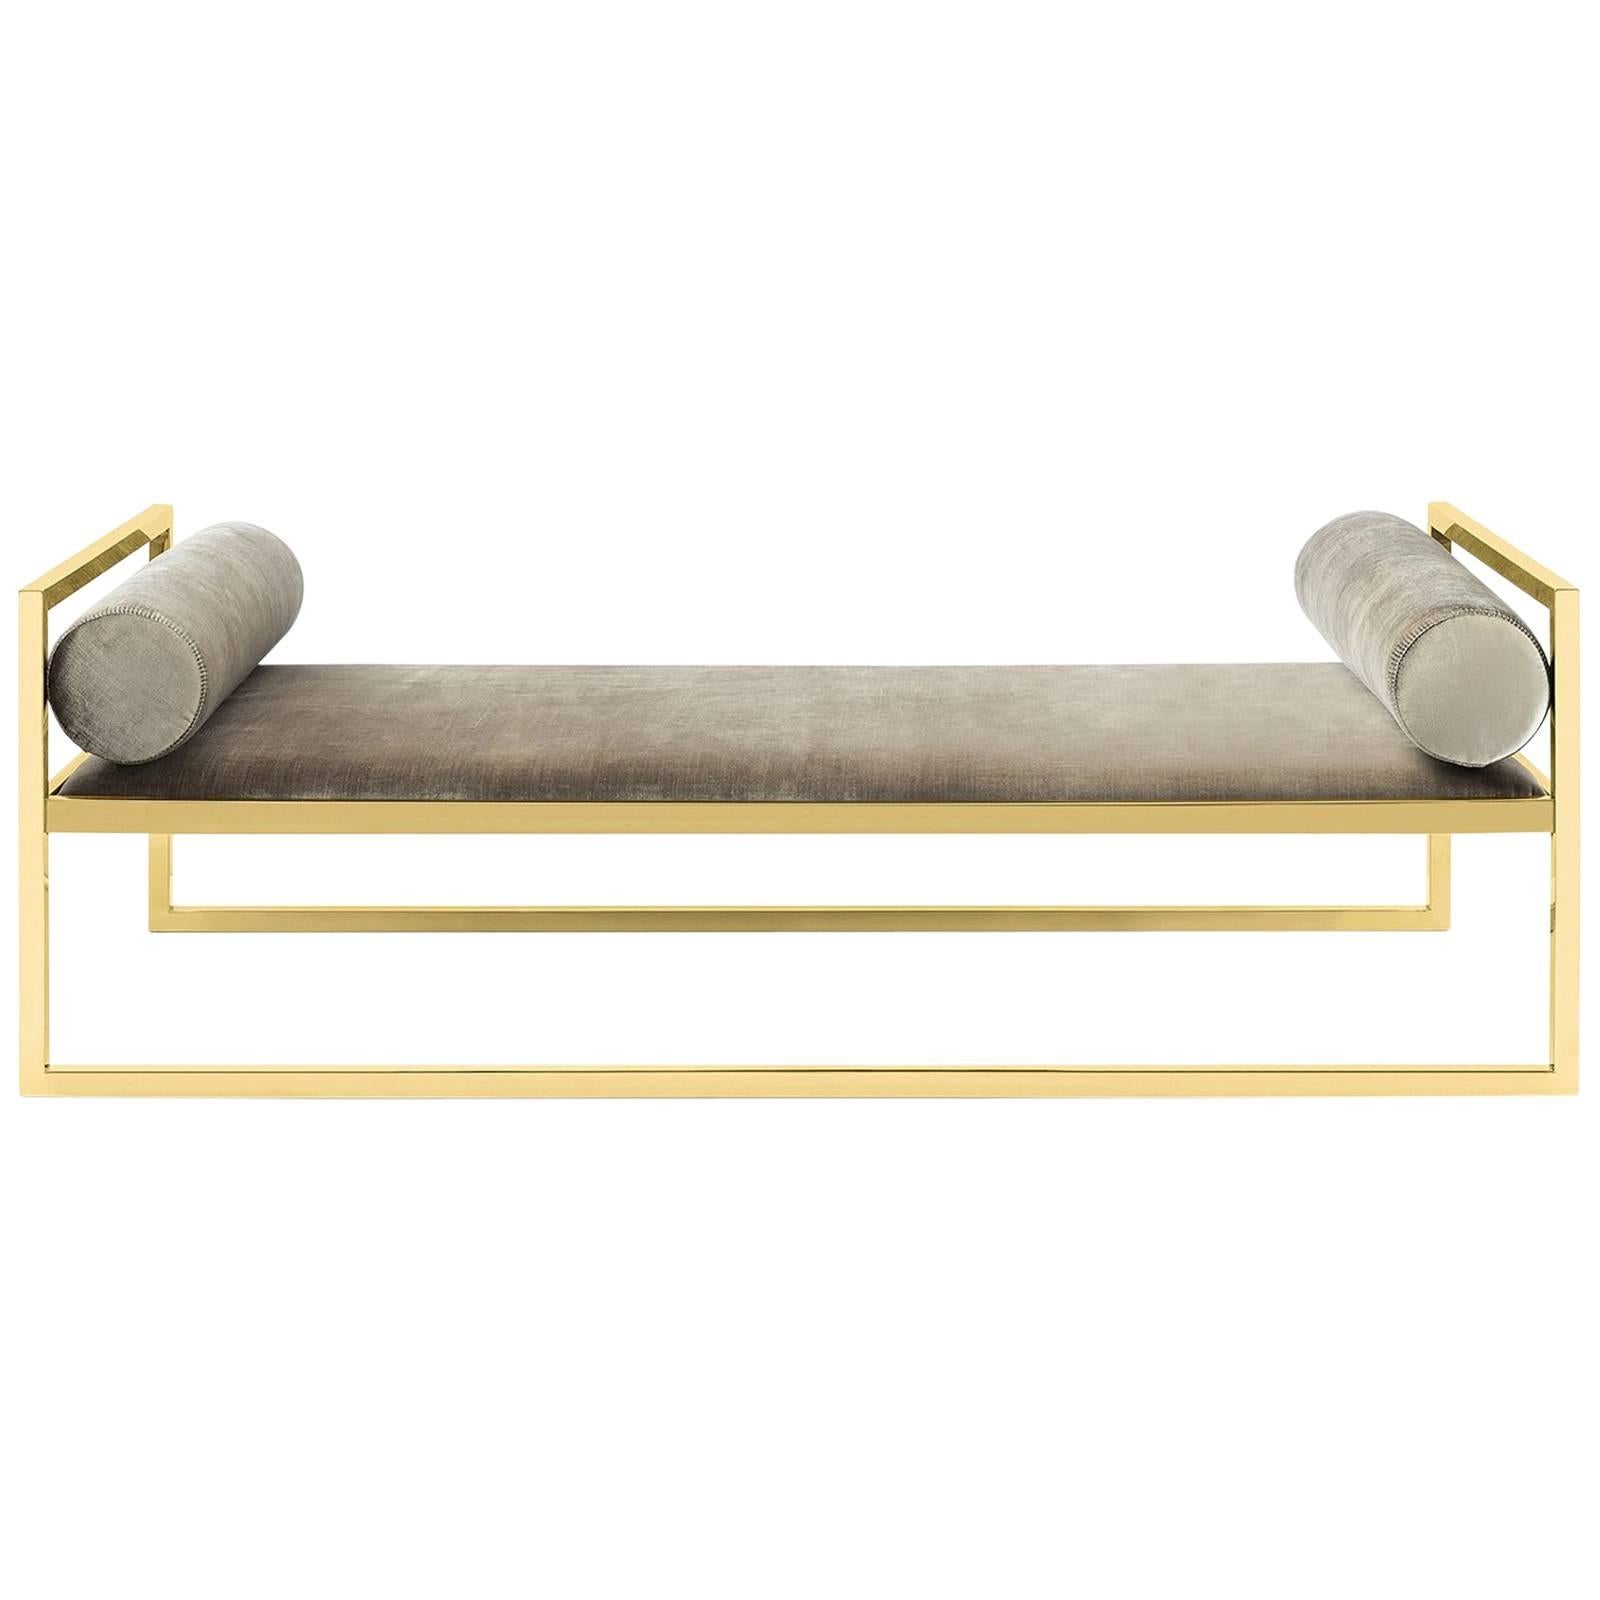 Grand Avenue Daybed in Gold Finish